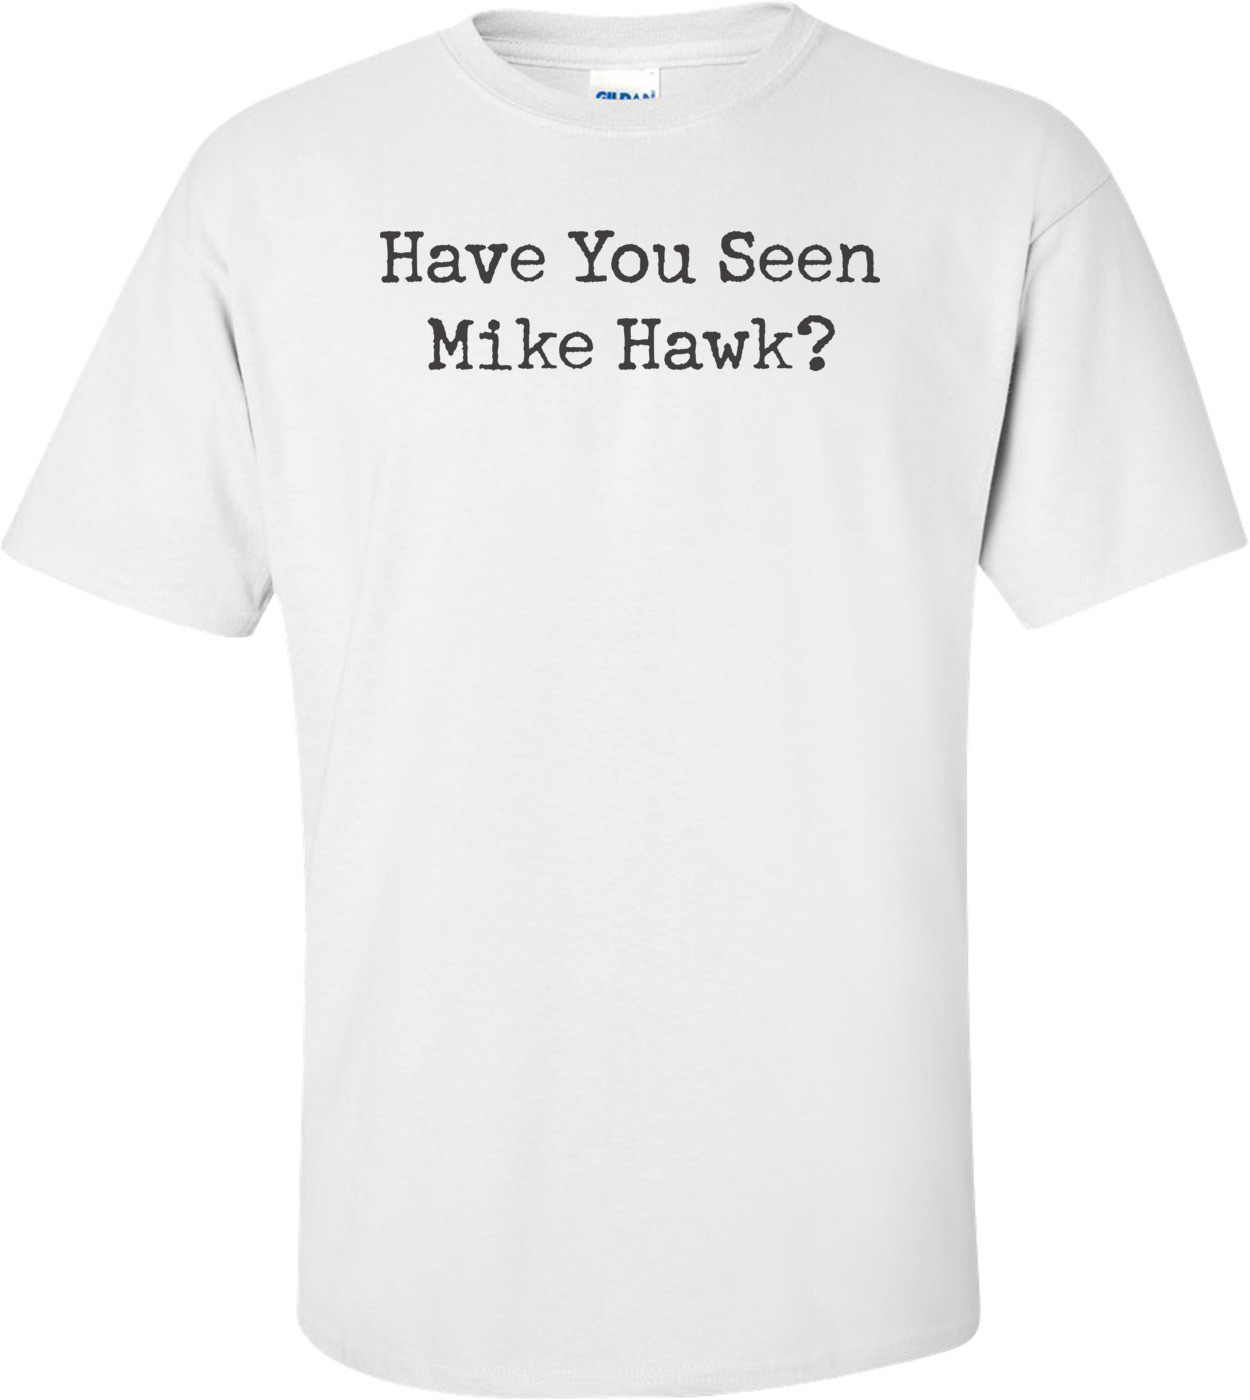 Have You Seen Mike Hawk